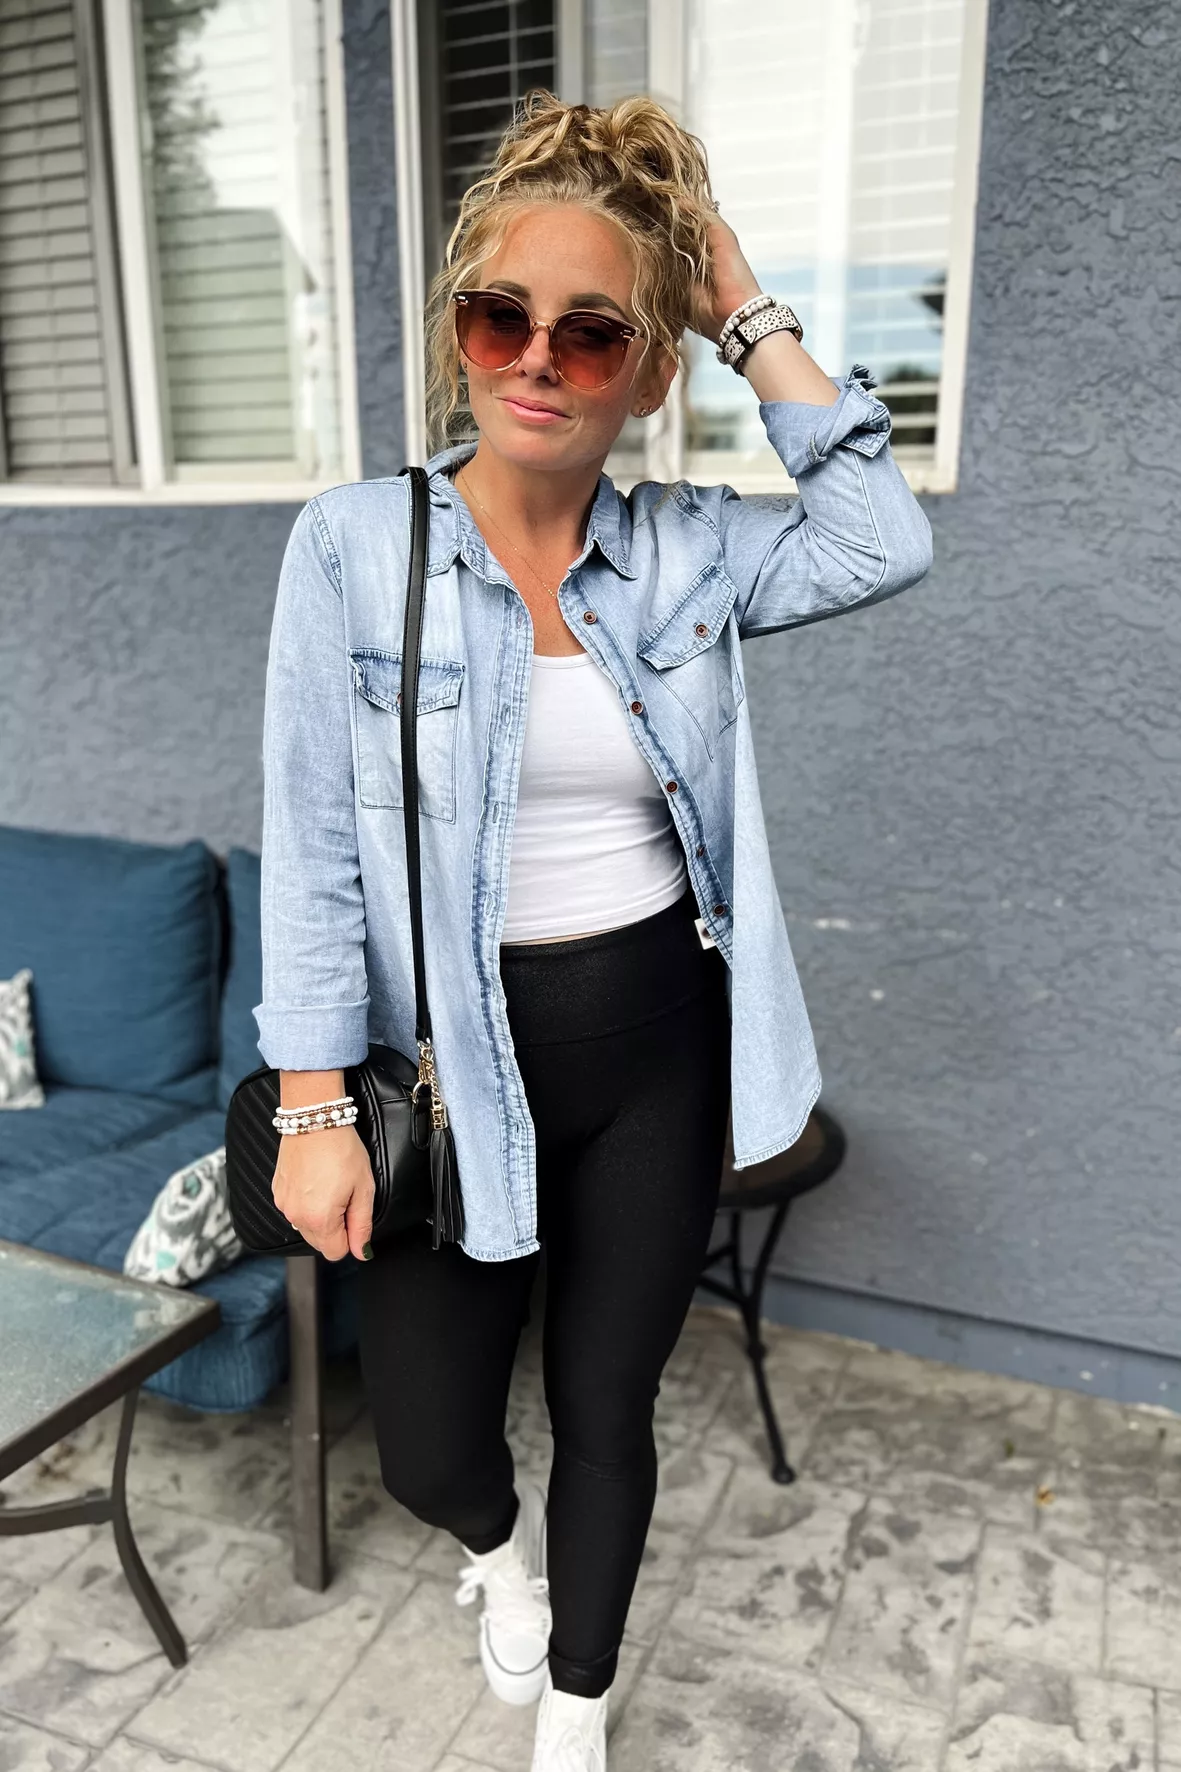 Grey Leggings with Blouse Outfits (2 ideas & outfits)